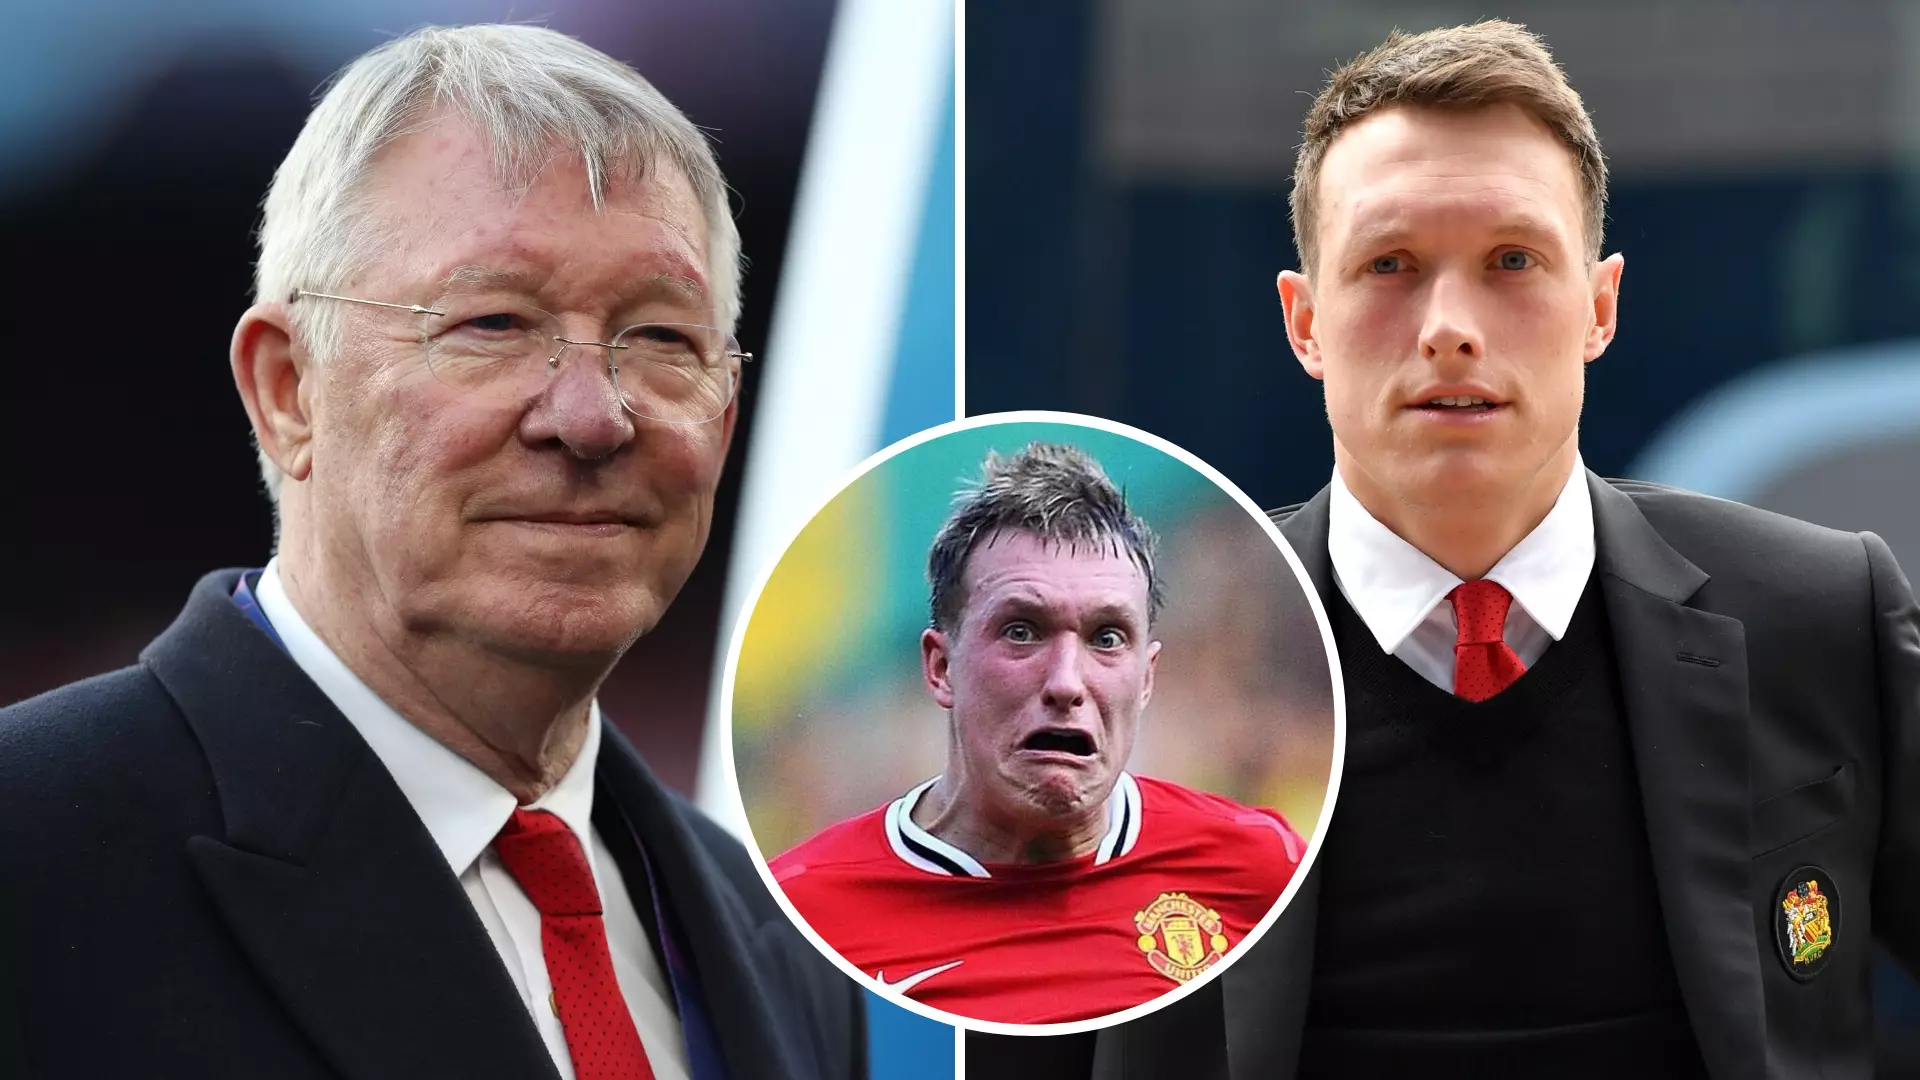 Sir Alex Ferguson Claimed Phil Jones Could Become Manchester United's ‘Best Ever Player’